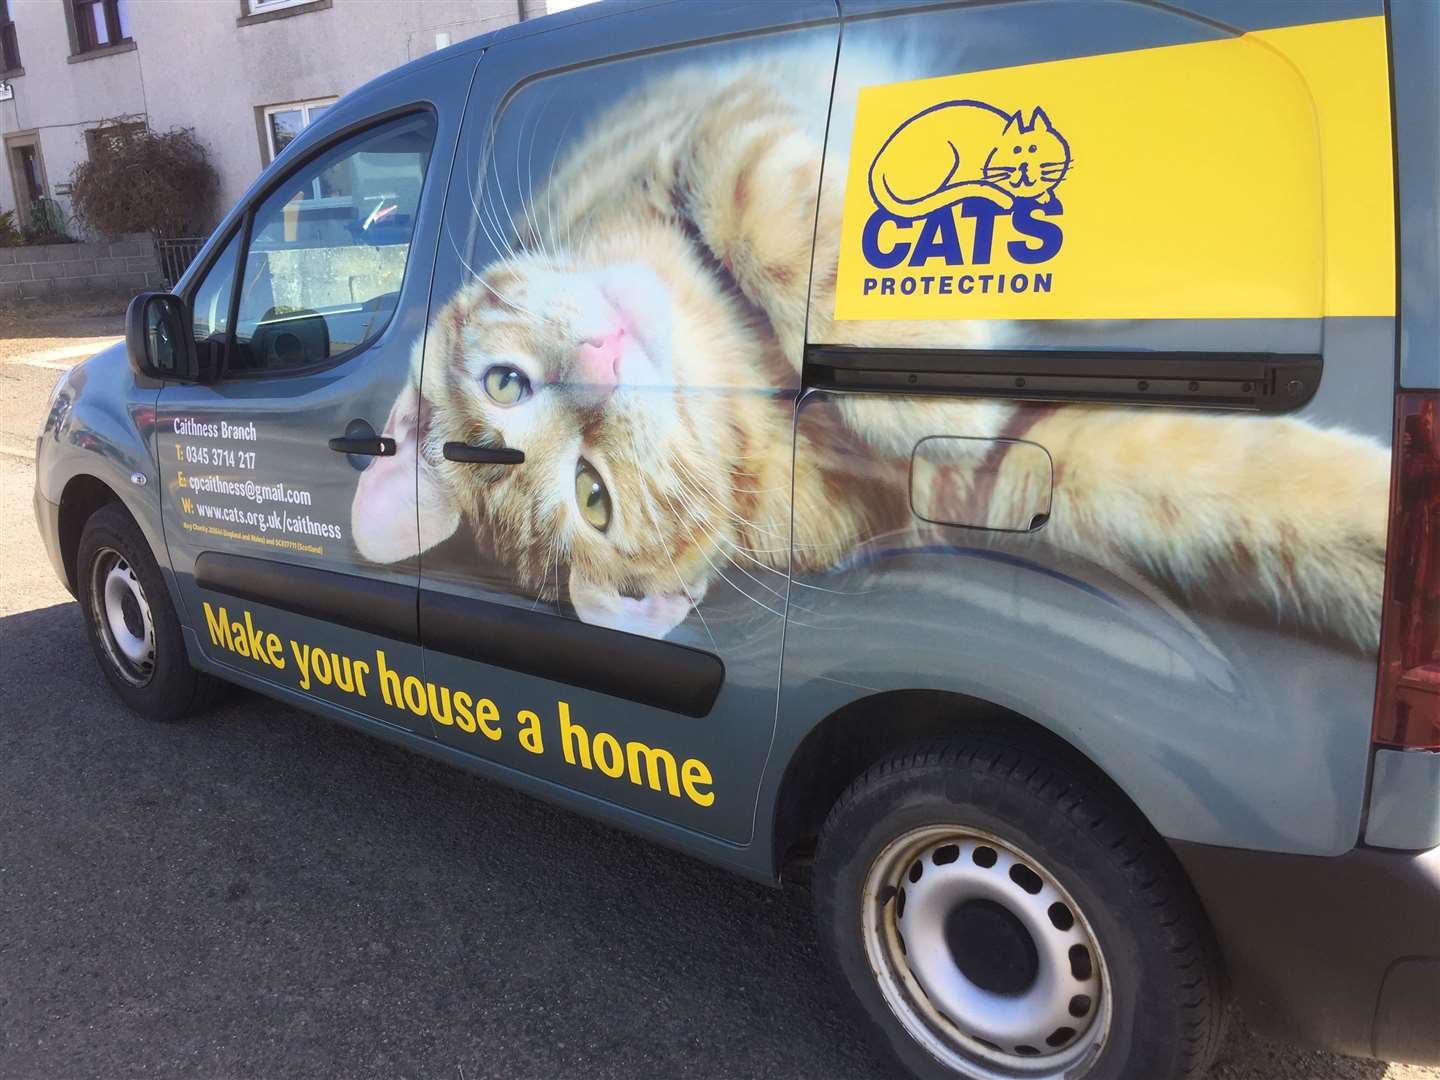 One of the Cats Protection vans in Caithness.